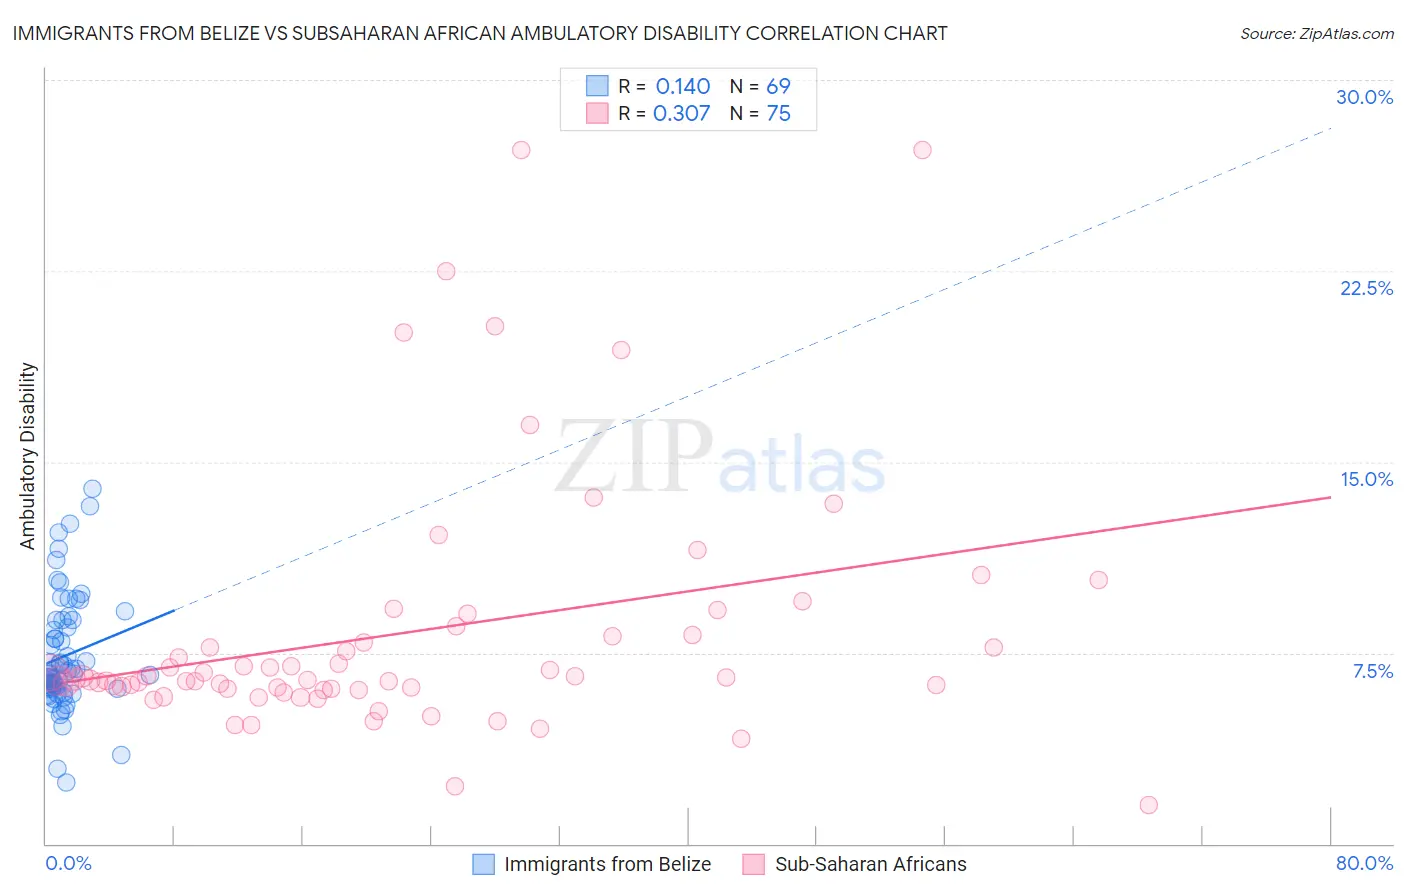 Immigrants from Belize vs Subsaharan African Ambulatory Disability